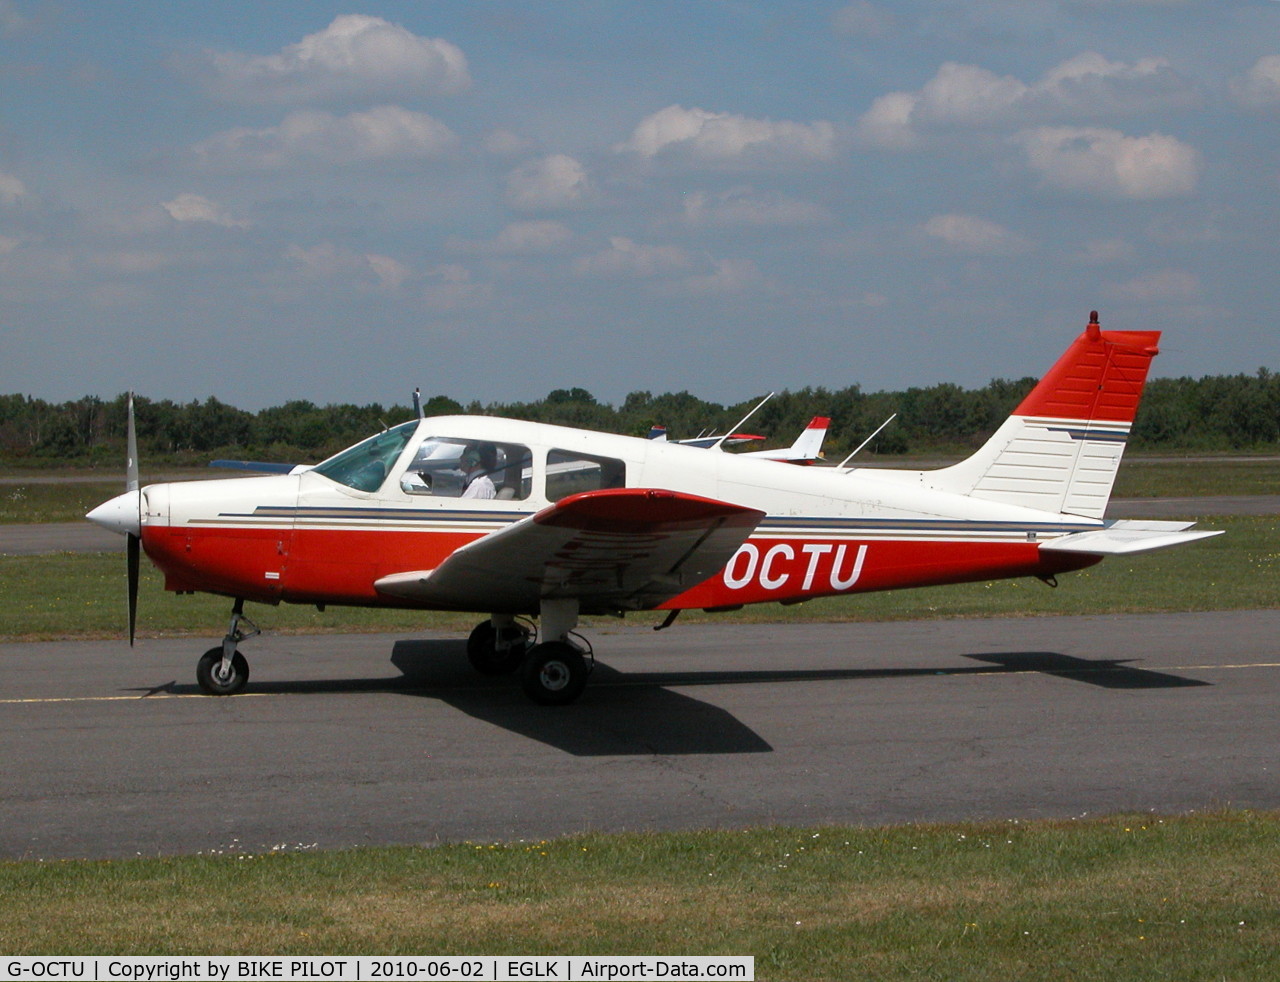 G-OCTU, 1989 Piper PA-28-161 Cadet C/N 2841280, VISITING PA-28 TAXYING PAST THE CAFE